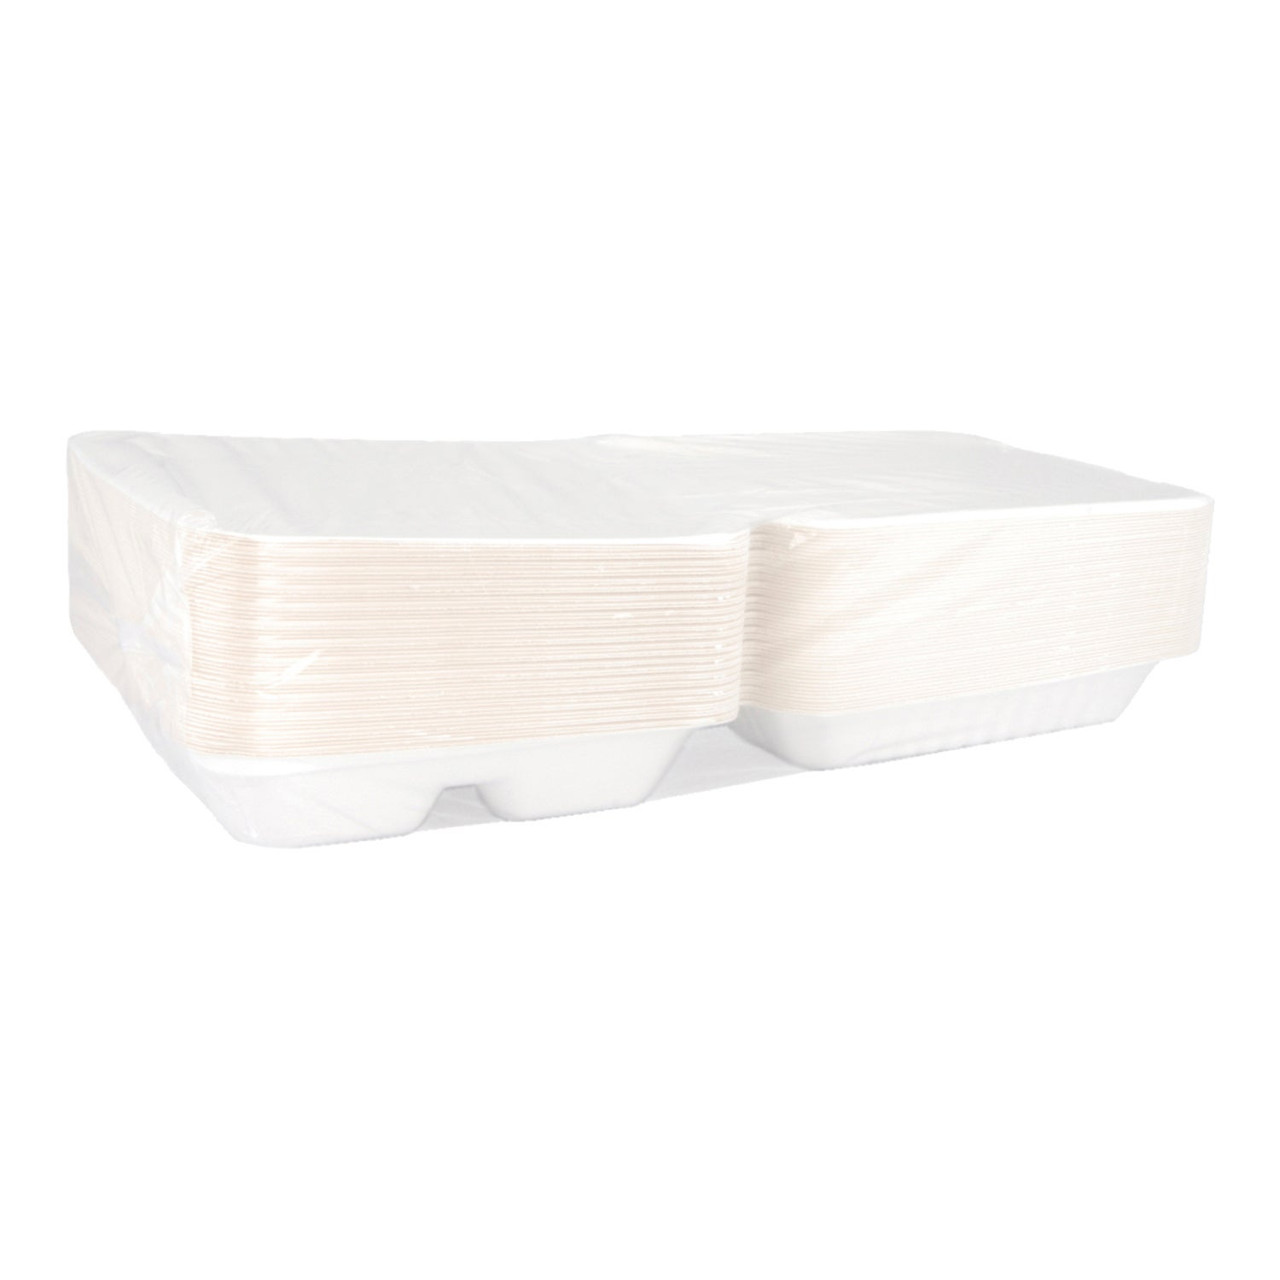 Gordon Choice 50oz 3 Compartment Hinged White Bagasse Paper Containers, 9X9X2.5In, Ecology Friendly | 50UN/Unit, 4 Units/Case